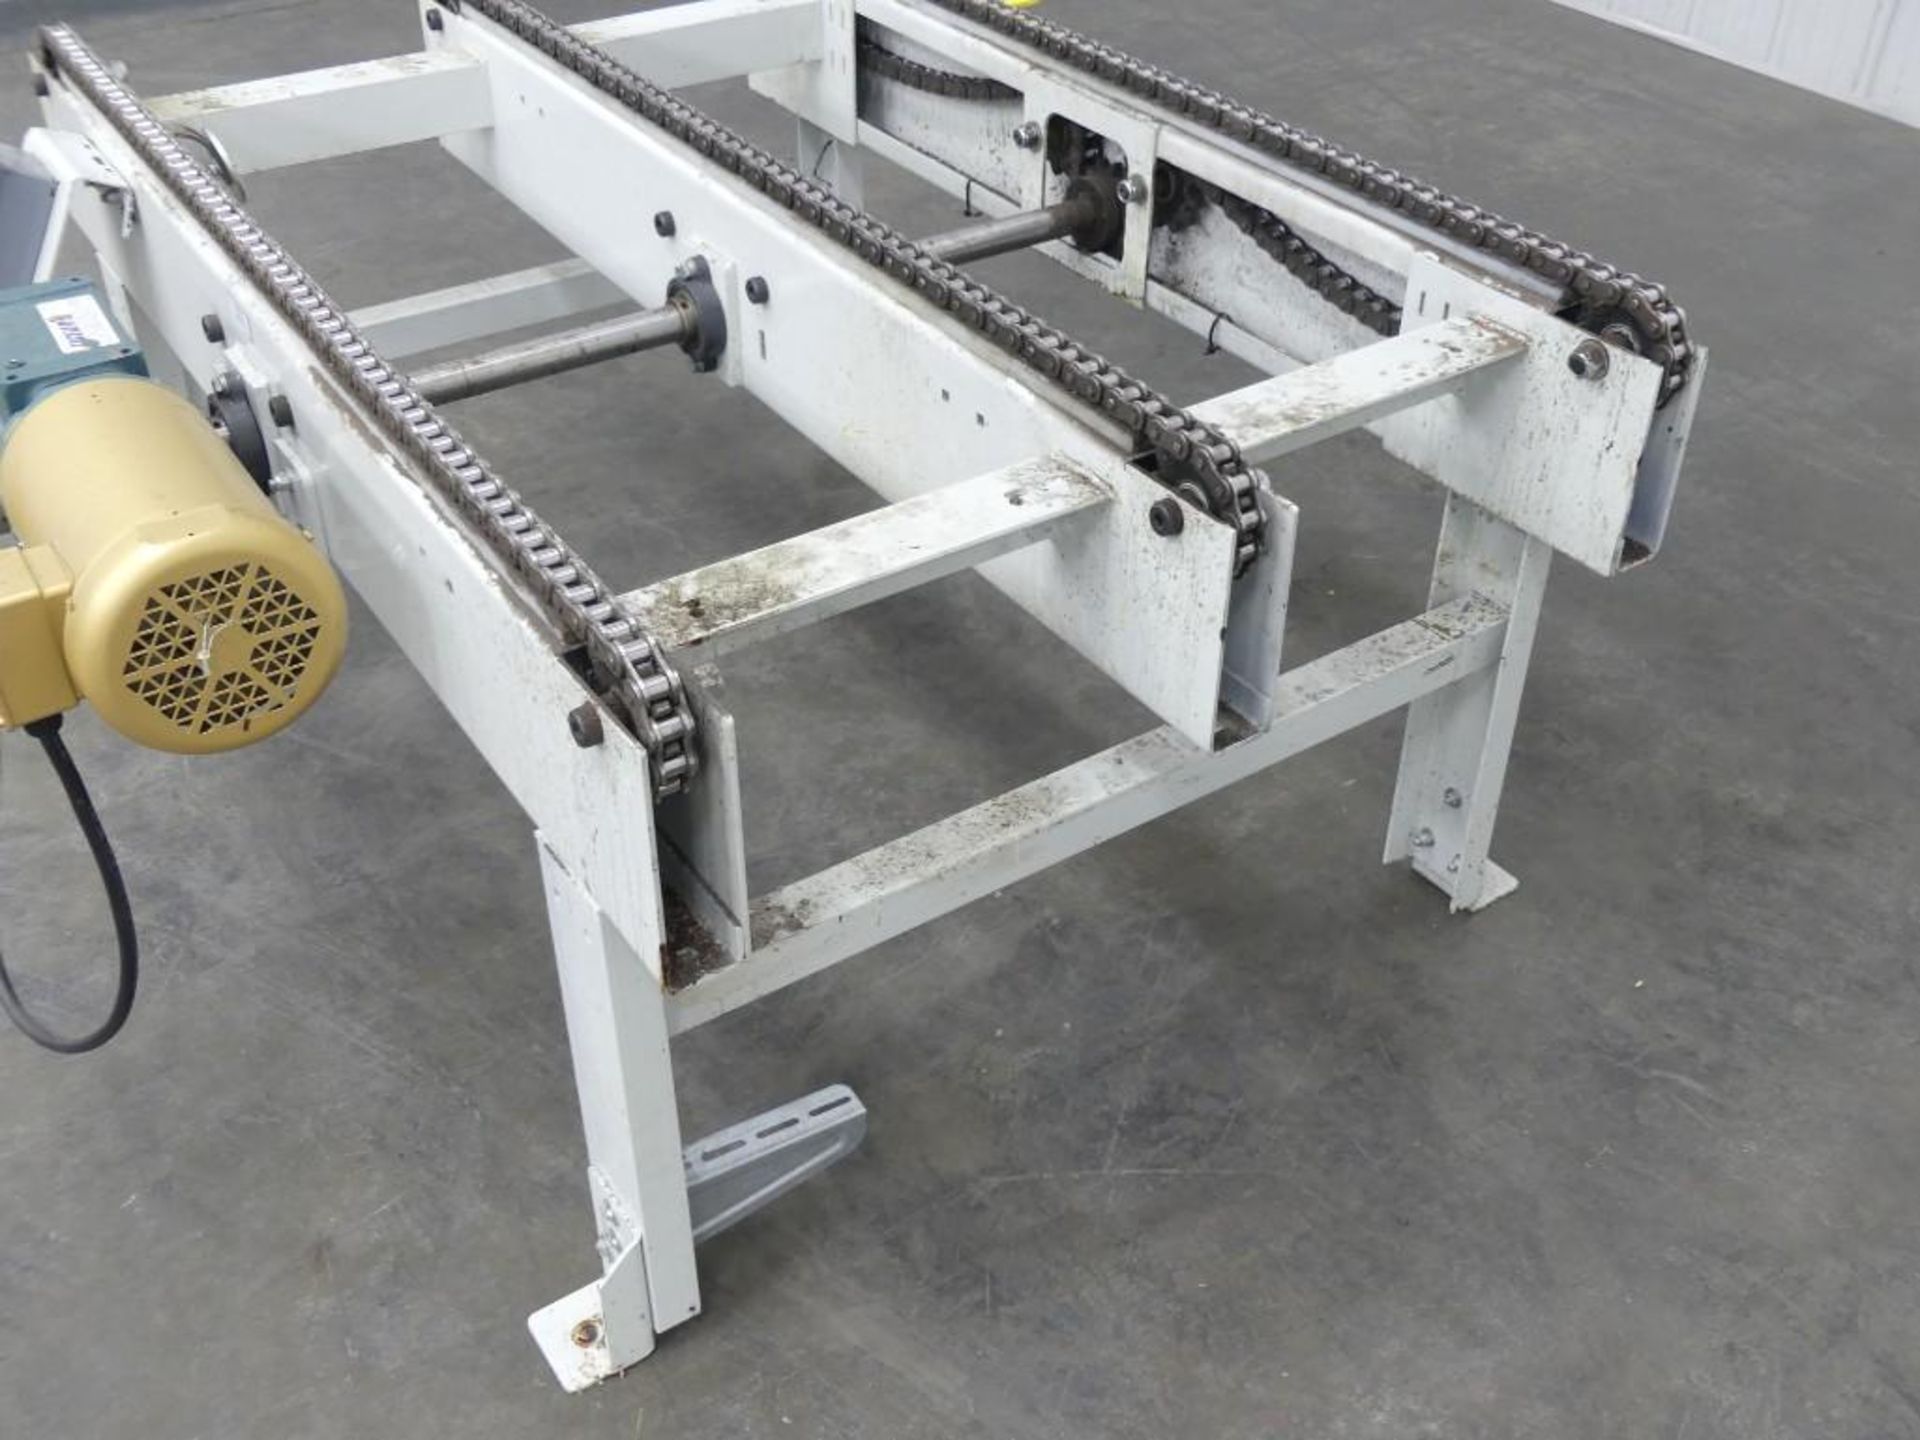 vonGAL 60 Inch L x 37 Inch W Chain Pallet Conveyor - Image 3 of 7